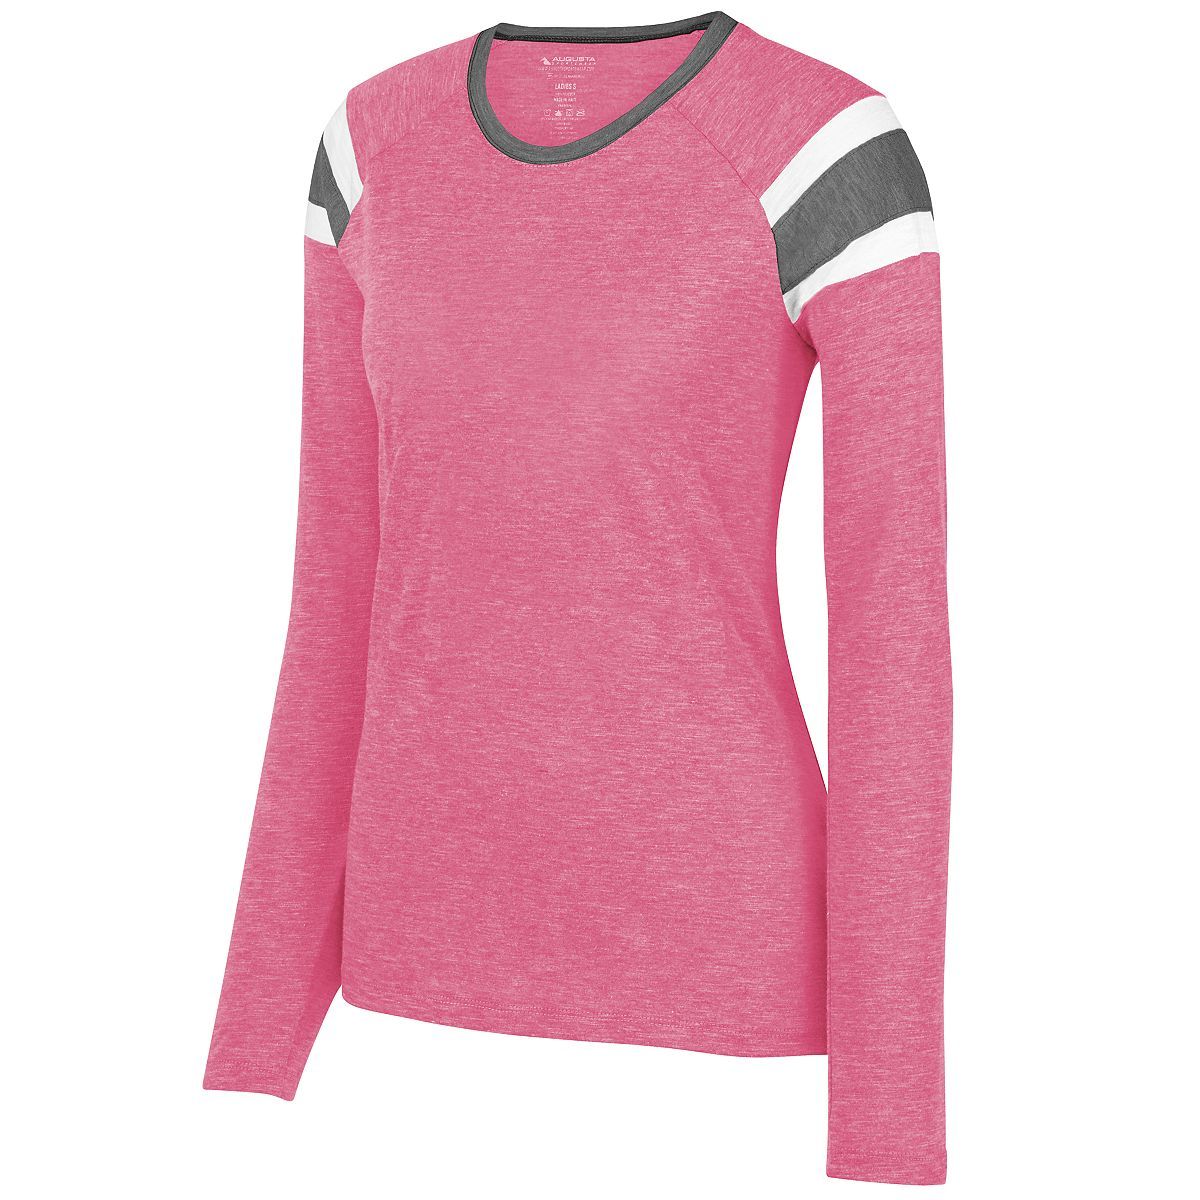 Augusta Sportswear Ladies Long Sleeve Fanatic Tee in Power Pink/Slate/White  -Part of the Ladies, Ladies-Tee-Shirt, T-Shirts, Augusta-Products, Shirts product lines at KanaleyCreations.com